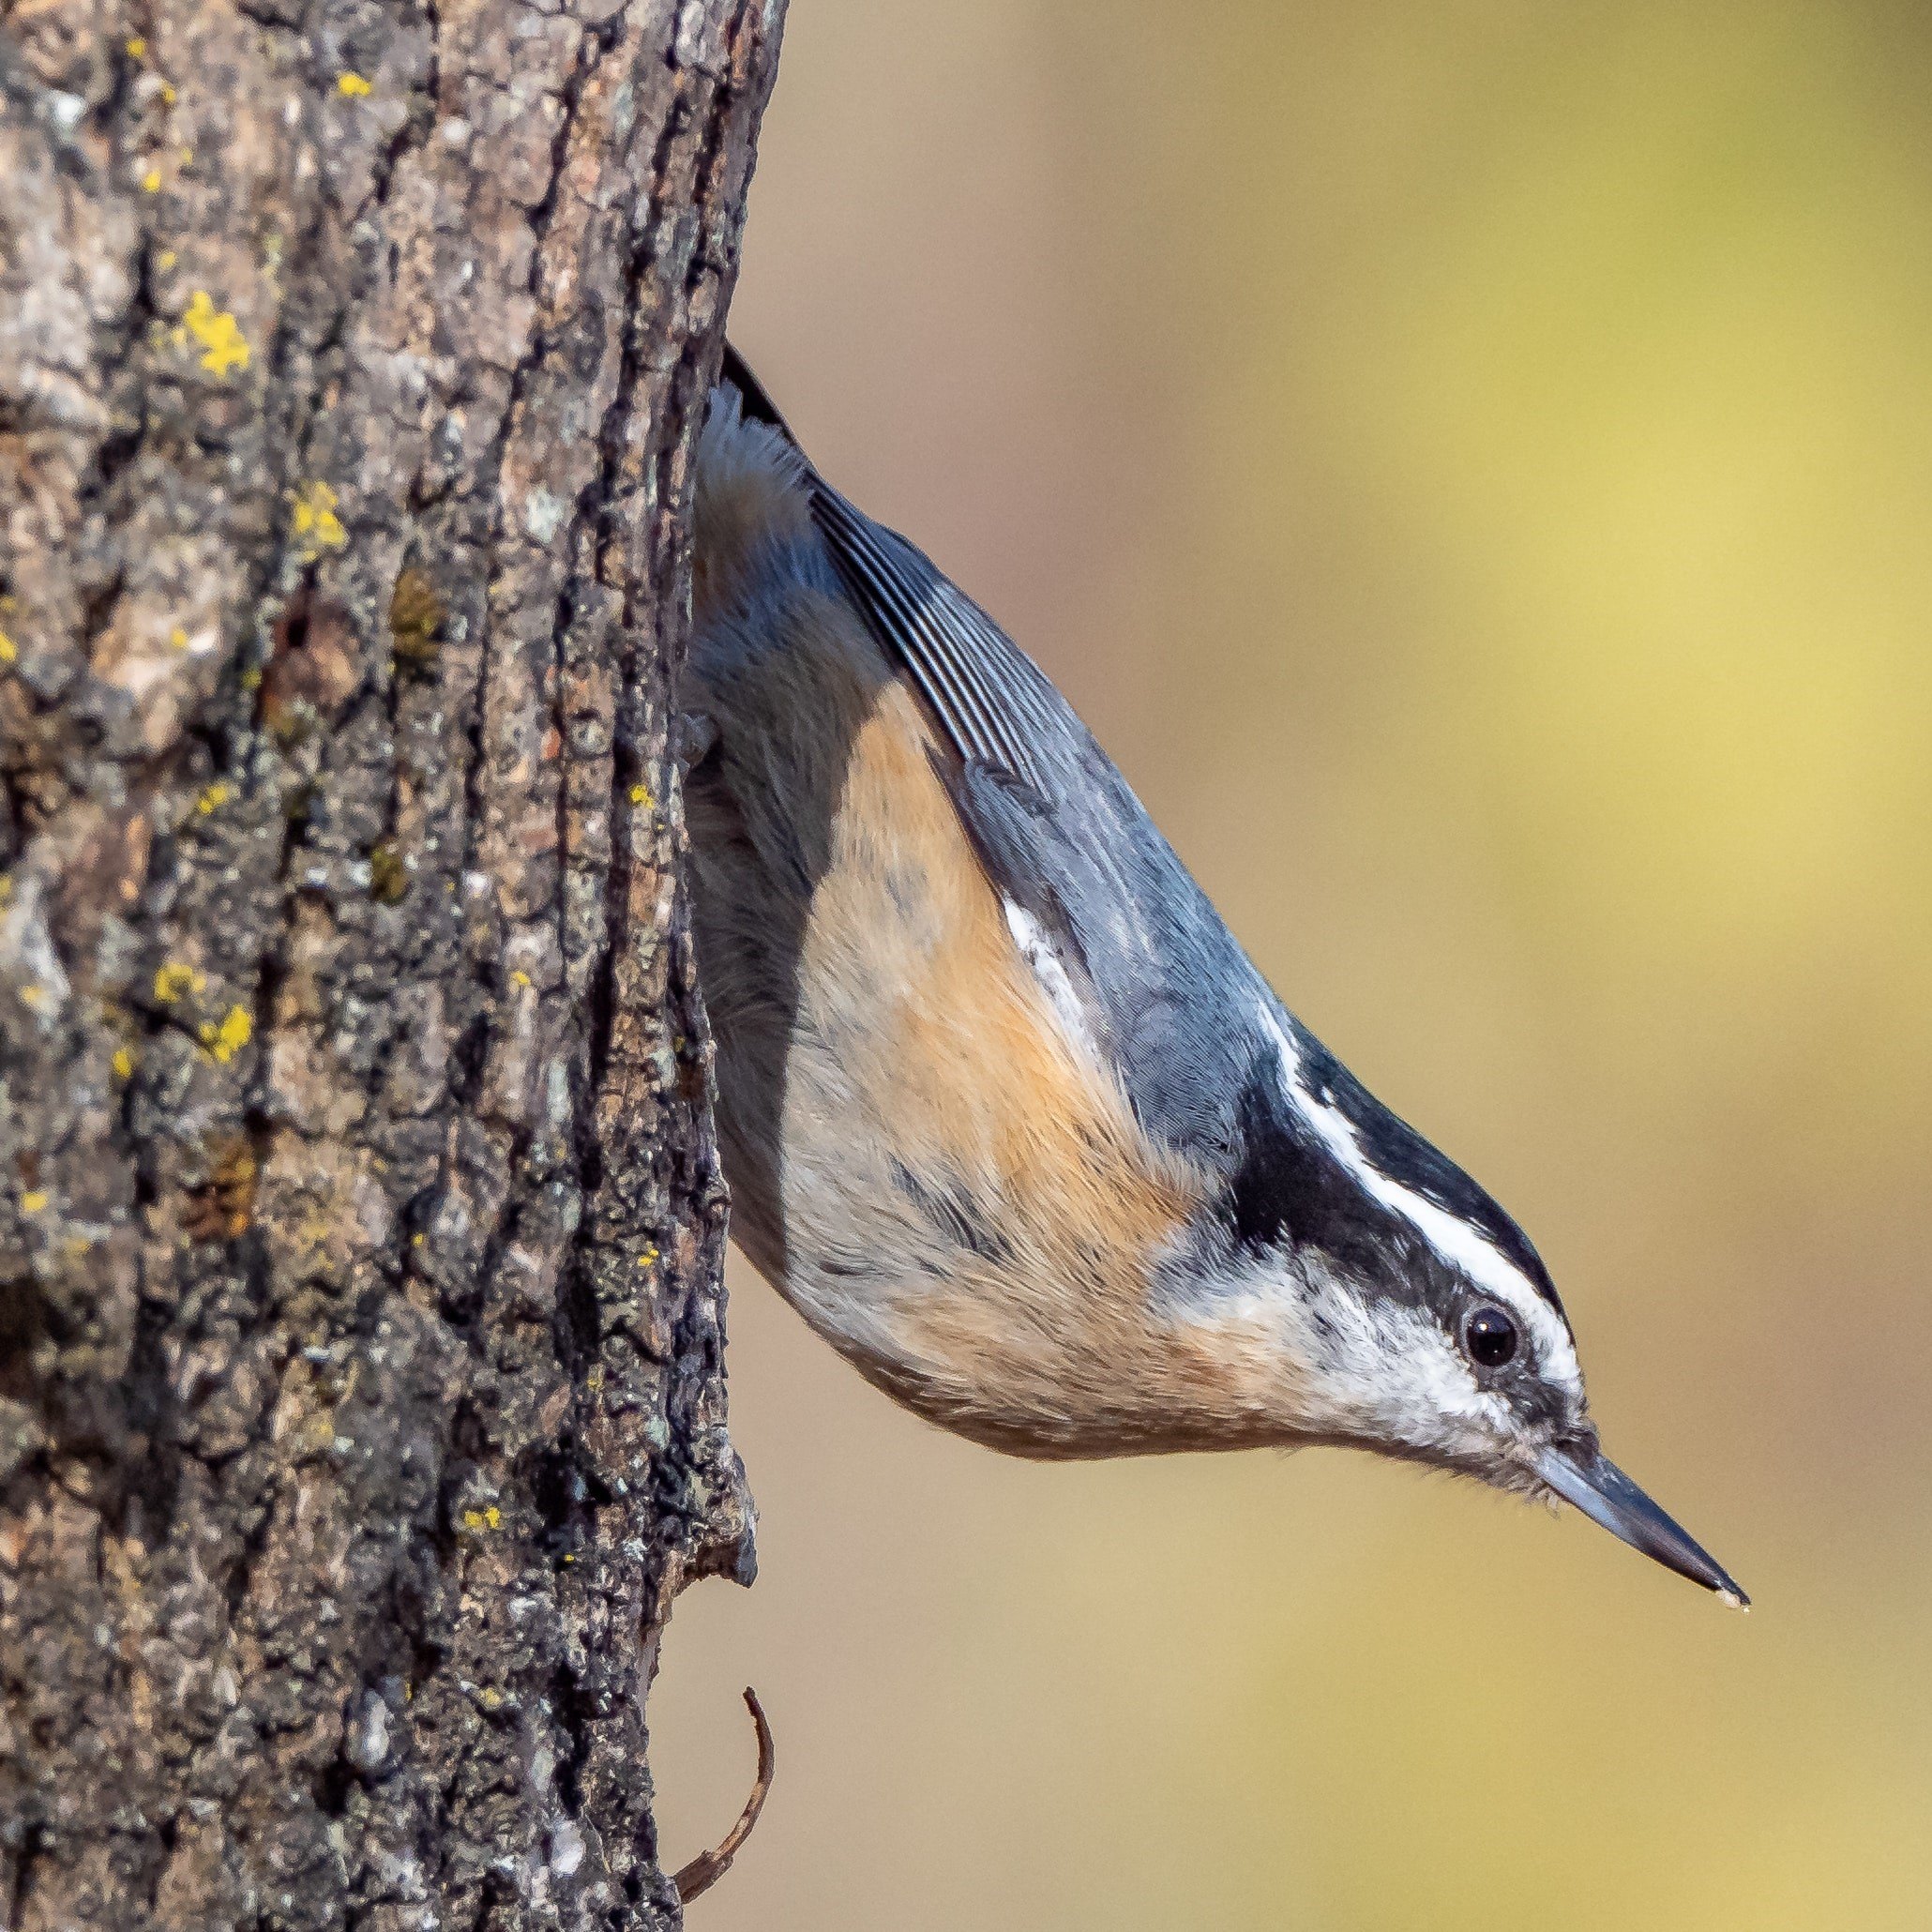 Red-breasted Nuthatch perched upside down on a tree.